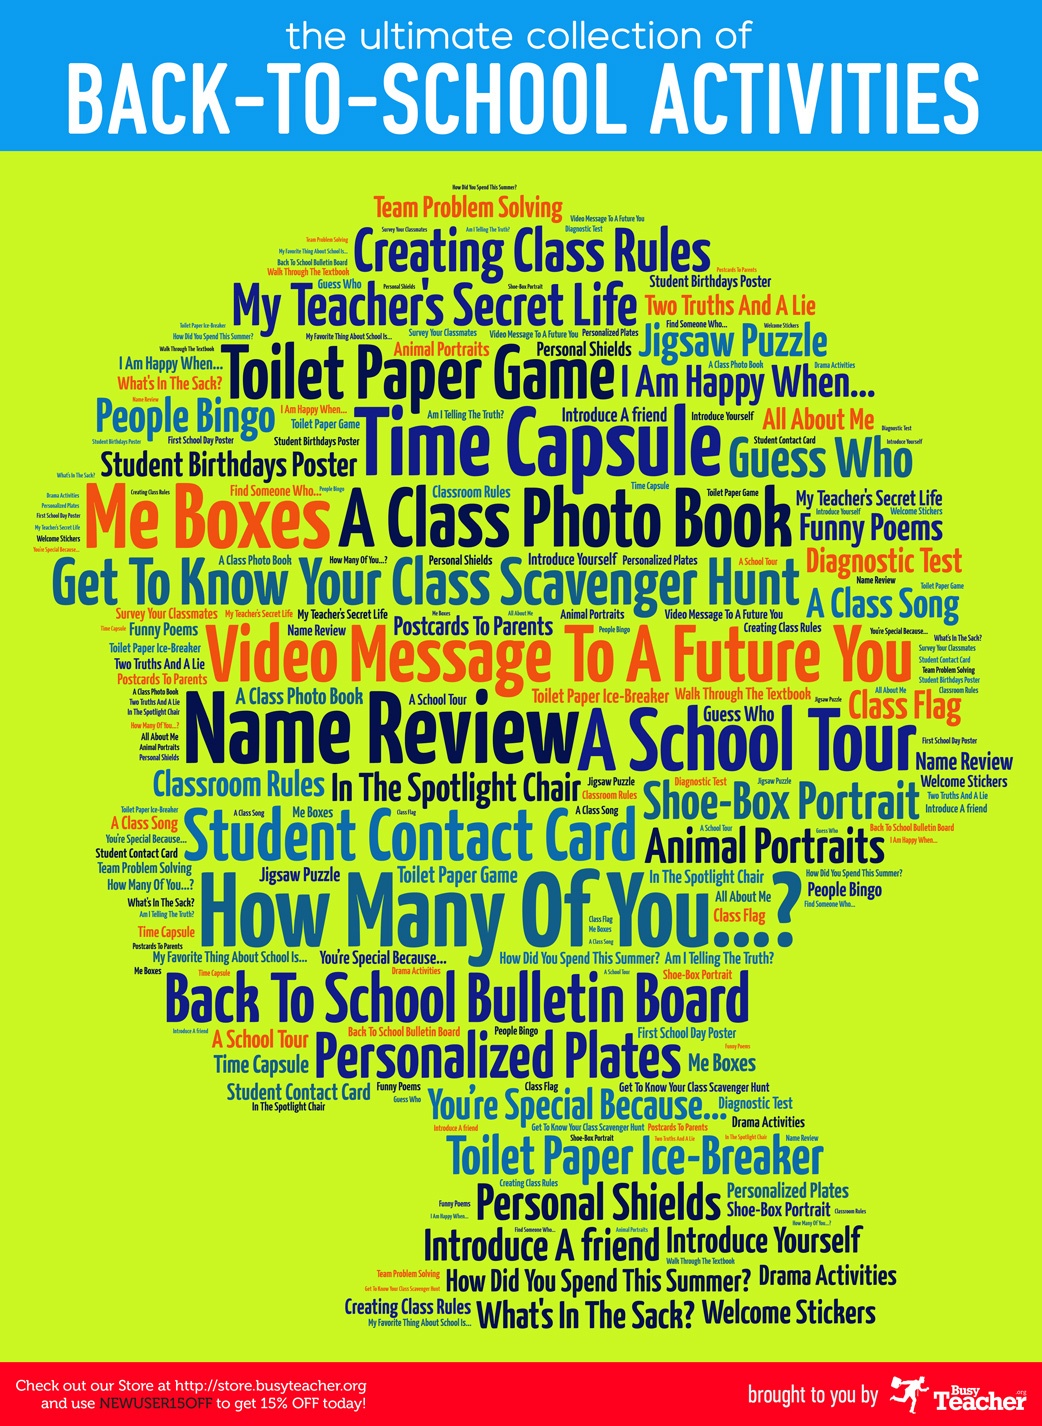 66 Free Classroom Posters - Free Printable Educational Posters